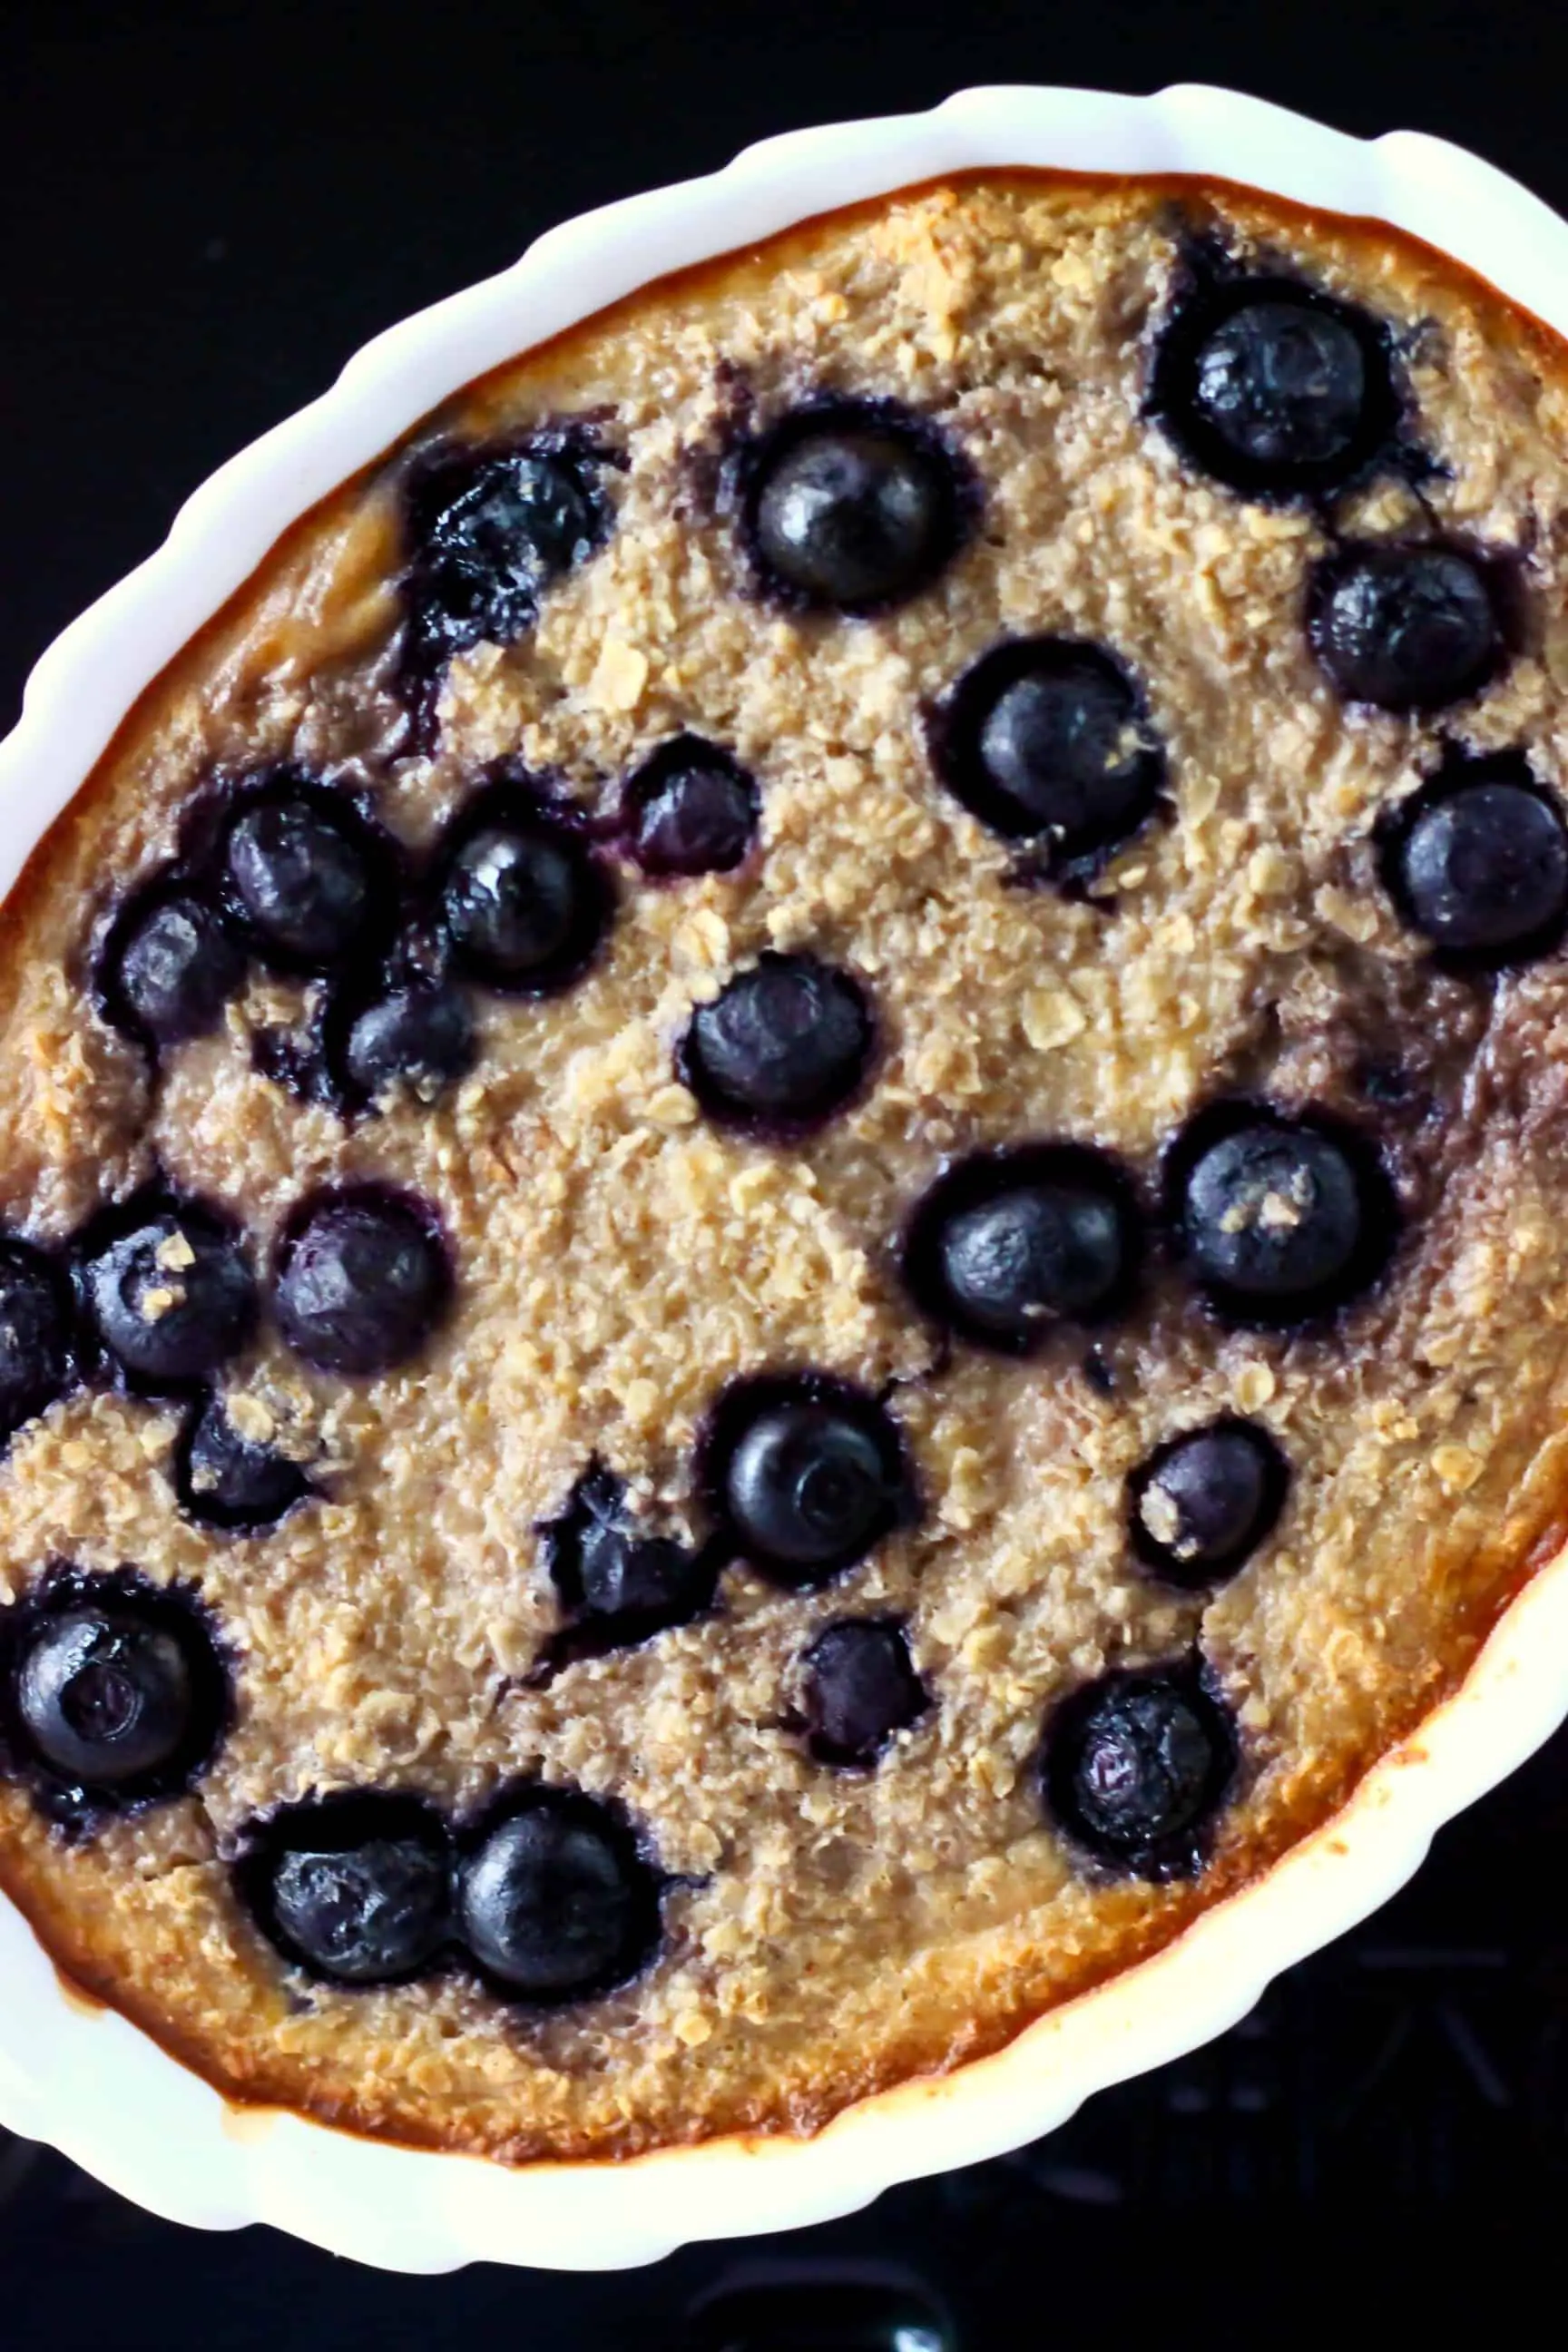 Baked oatmeal with blueberries in a white oval dish against a black background